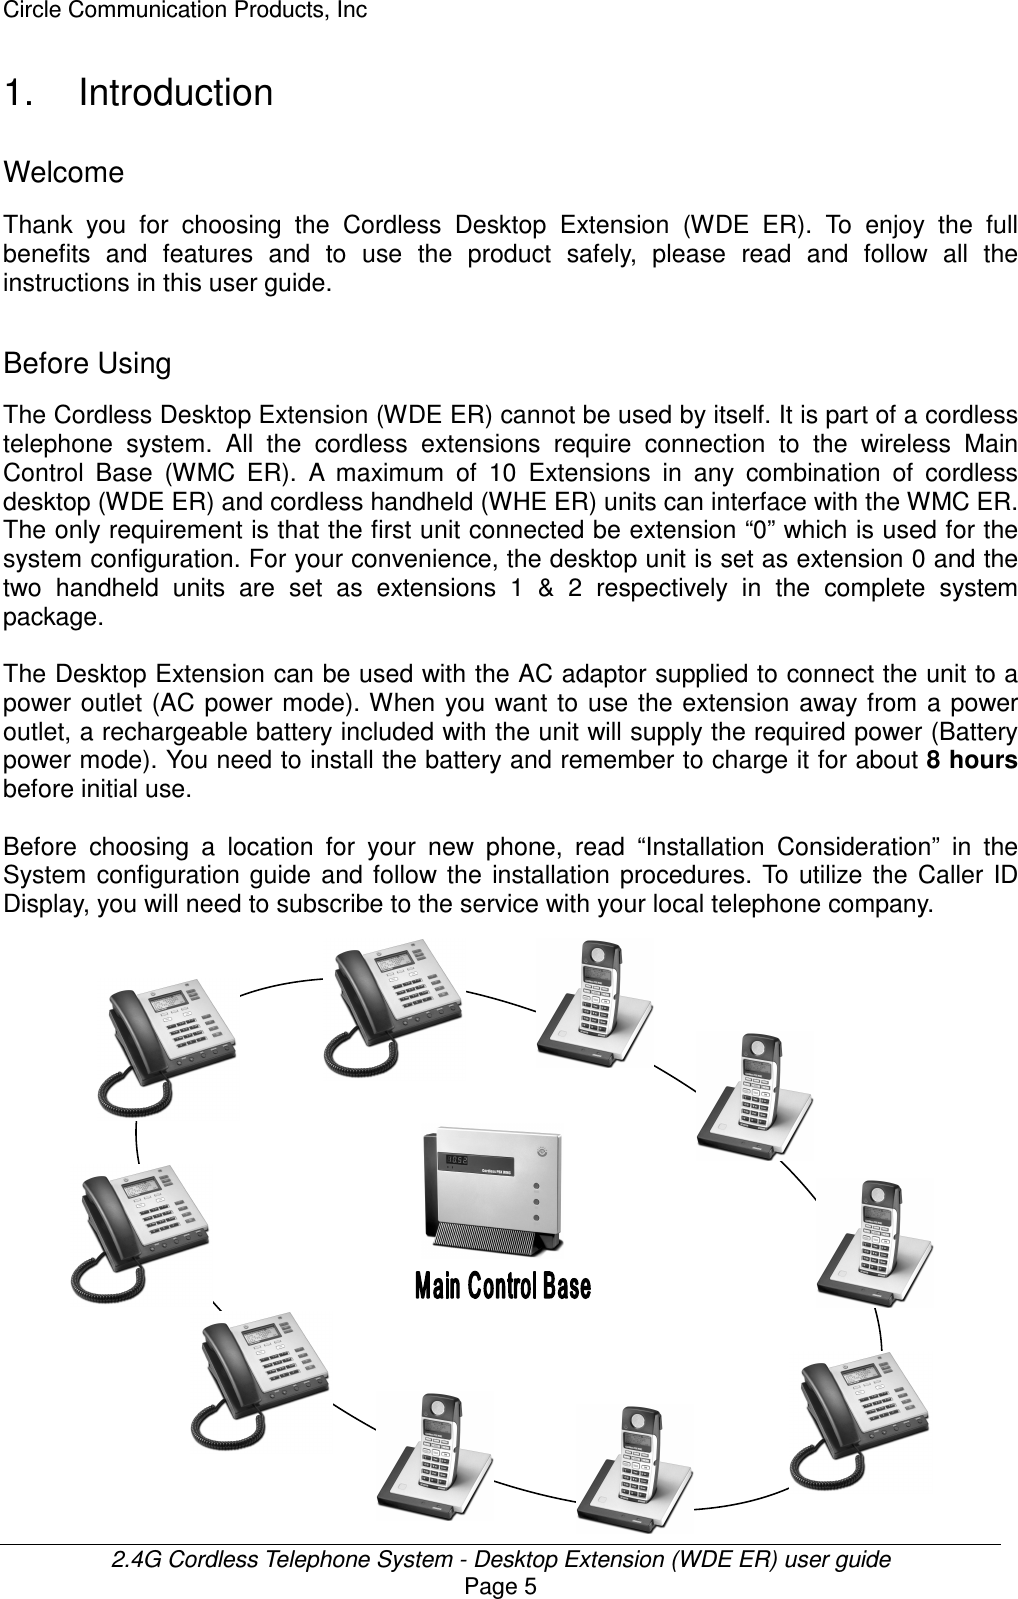 Circle Communication Products, Inc  2.4G Cordless Telephone System - Desktop Extension (WDE ER) user guide Page 5 1.  Introduction Welcome Thank  you  for  choosing  the  Cordless  Desktop  Extension  (WDE  ER).  To  enjoy  the  full benefits  and  features  and  to  use  the  product  safely,  please  read  and  follow  all  the instructions in this user guide.  Before Using The Cordless Desktop Extension (WDE ER) cannot be used by itself. It is part of a cordless telephone  system.  All  the  cordless  extensions  require  connection  to  the  wireless  Main Control  Base  (WMC  ER).  A  maximum  of  10  Extensions  in  any  combination  of  cordless desktop (WDE ER) and cordless handheld (WHE ER) units can interface with the WMC ER. The only requirement is that the first unit connected be extension “0” which is used for the system configuration. For your convenience, the desktop unit is set as extension 0 and the two  handheld  units  are  set  as  extensions  1  &amp;  2  respectively  in  the  complete  system package.  The Desktop Extension can be used with the AC adaptor supplied to connect the unit to a power outlet (AC power mode). When you want  to  use the extension away from a power outlet, a rechargeable battery included with the unit will supply the required power (Battery power mode). You need to install the battery and remember to charge it for about 8 hours before initial use.  Before  choosing  a  location  for  your  new  phone,  read  “Installation  Consideration”  in  the System  configuration  guide  and  follow  the  installation  procedures.  To  utilize the  Caller  ID Display, you will need to subscribe to the service with your local telephone company.                    